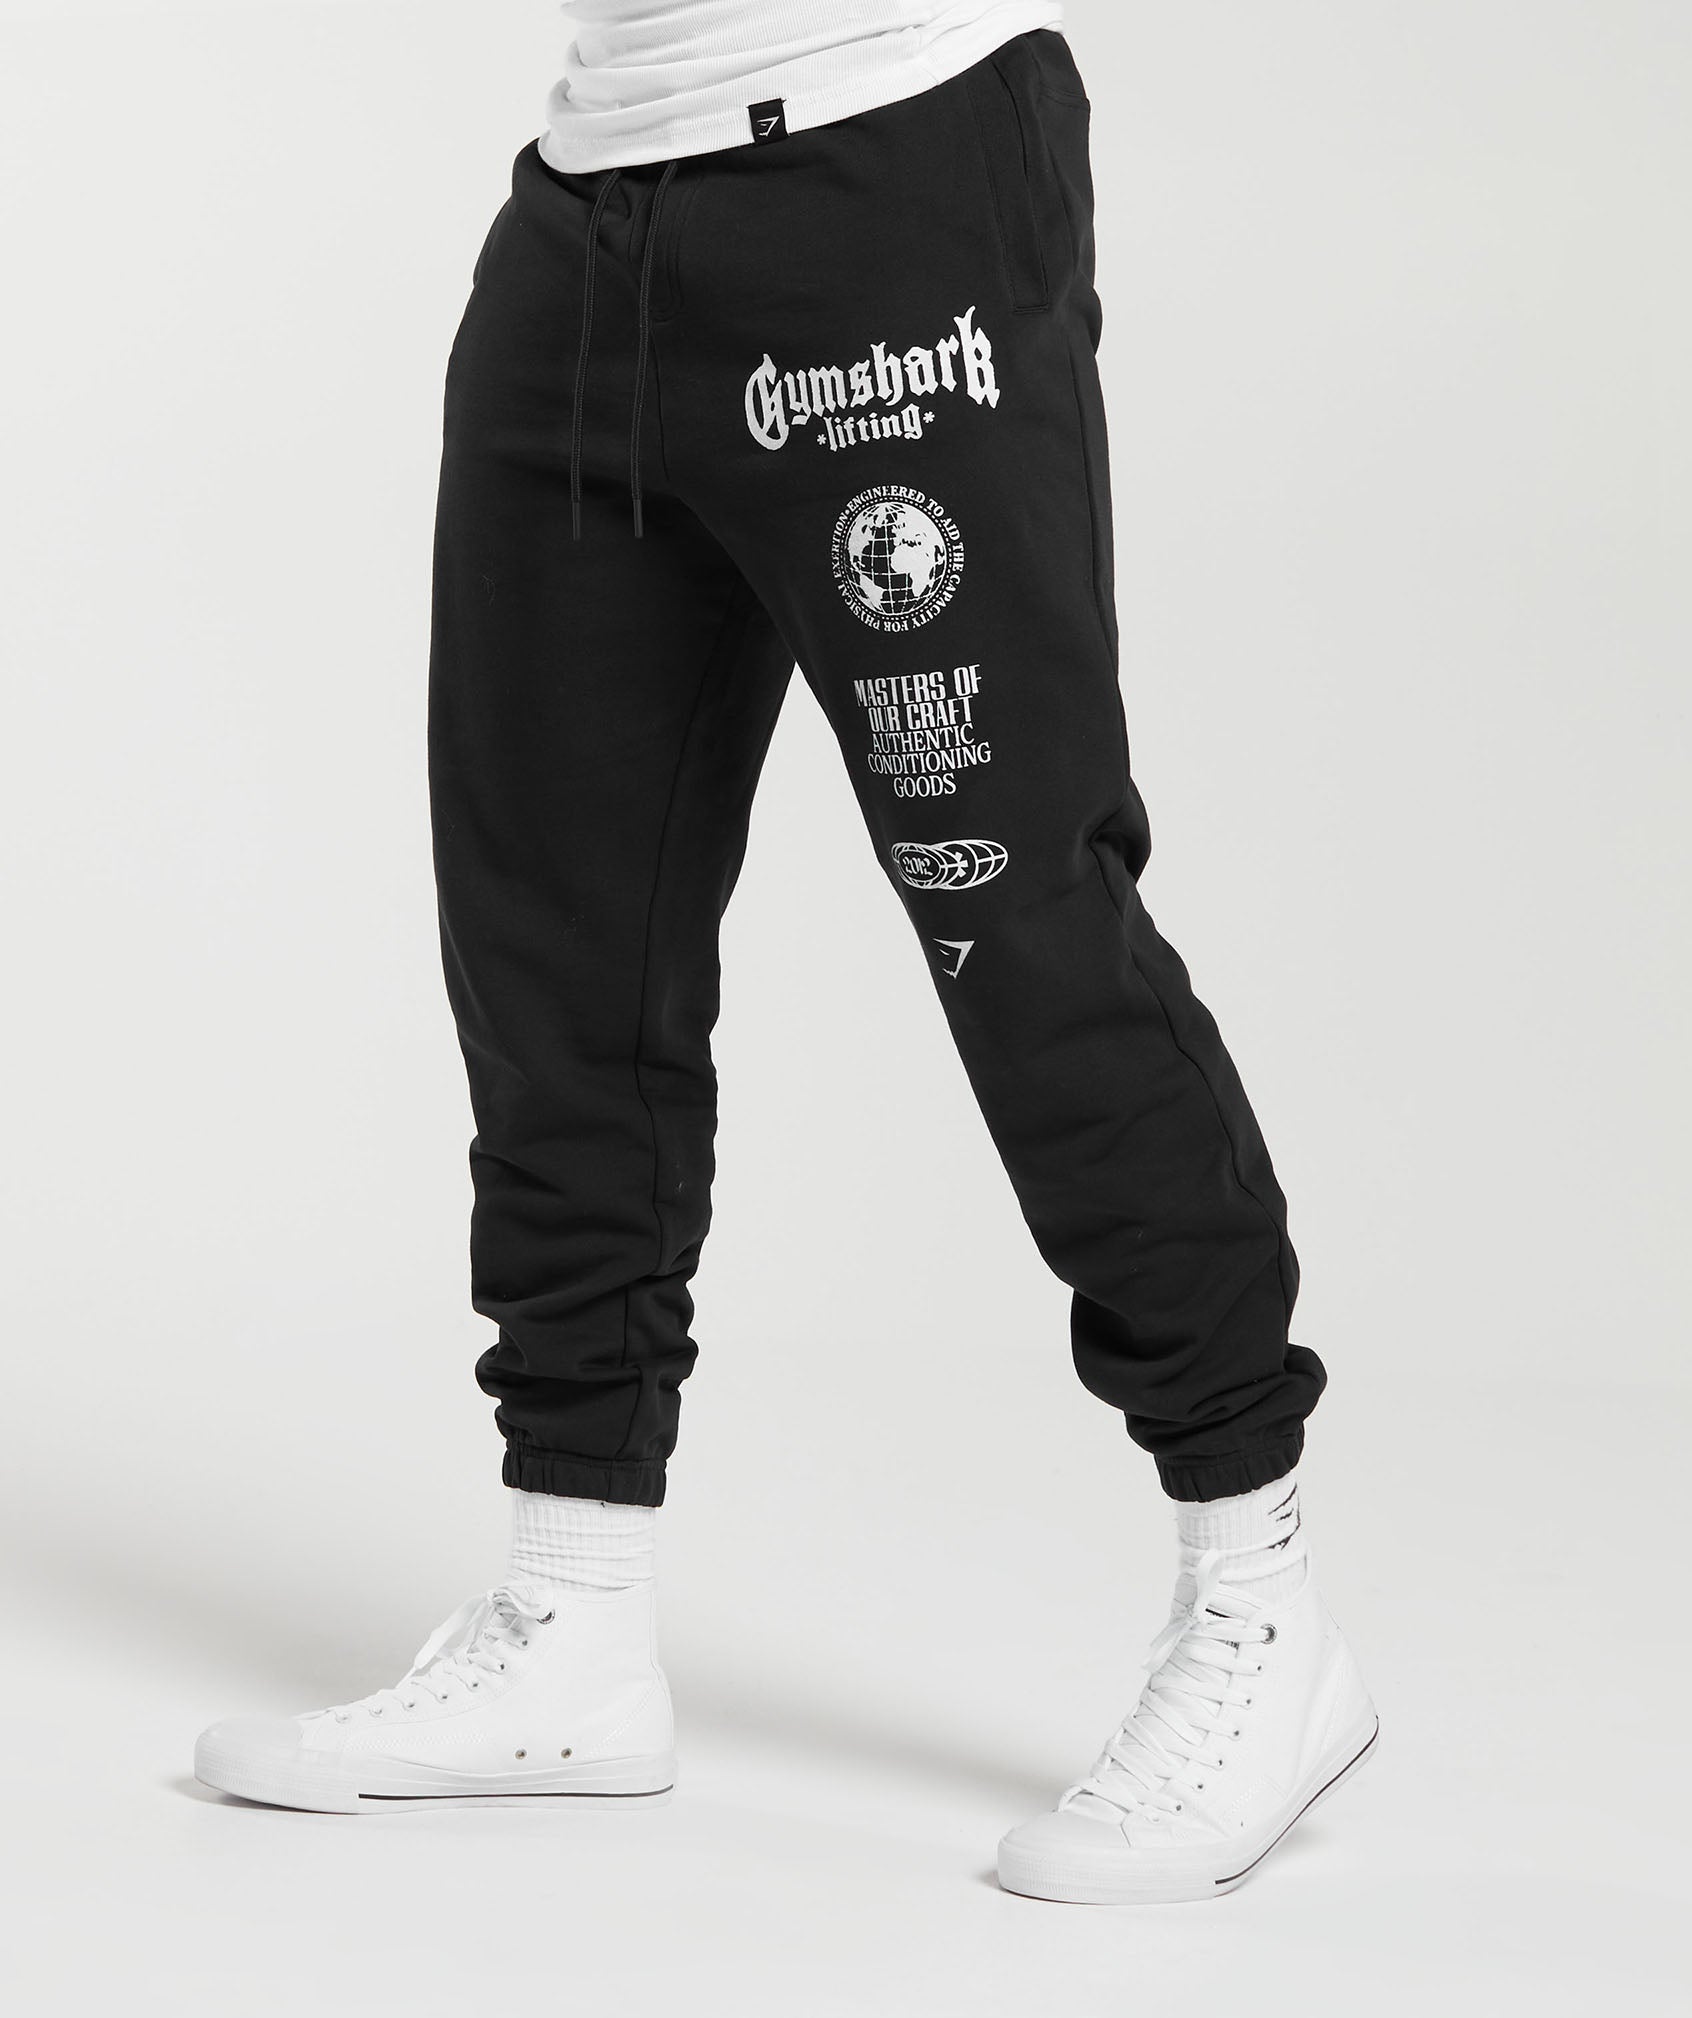 Global Lifting Oversized Joggers in Black - view 3